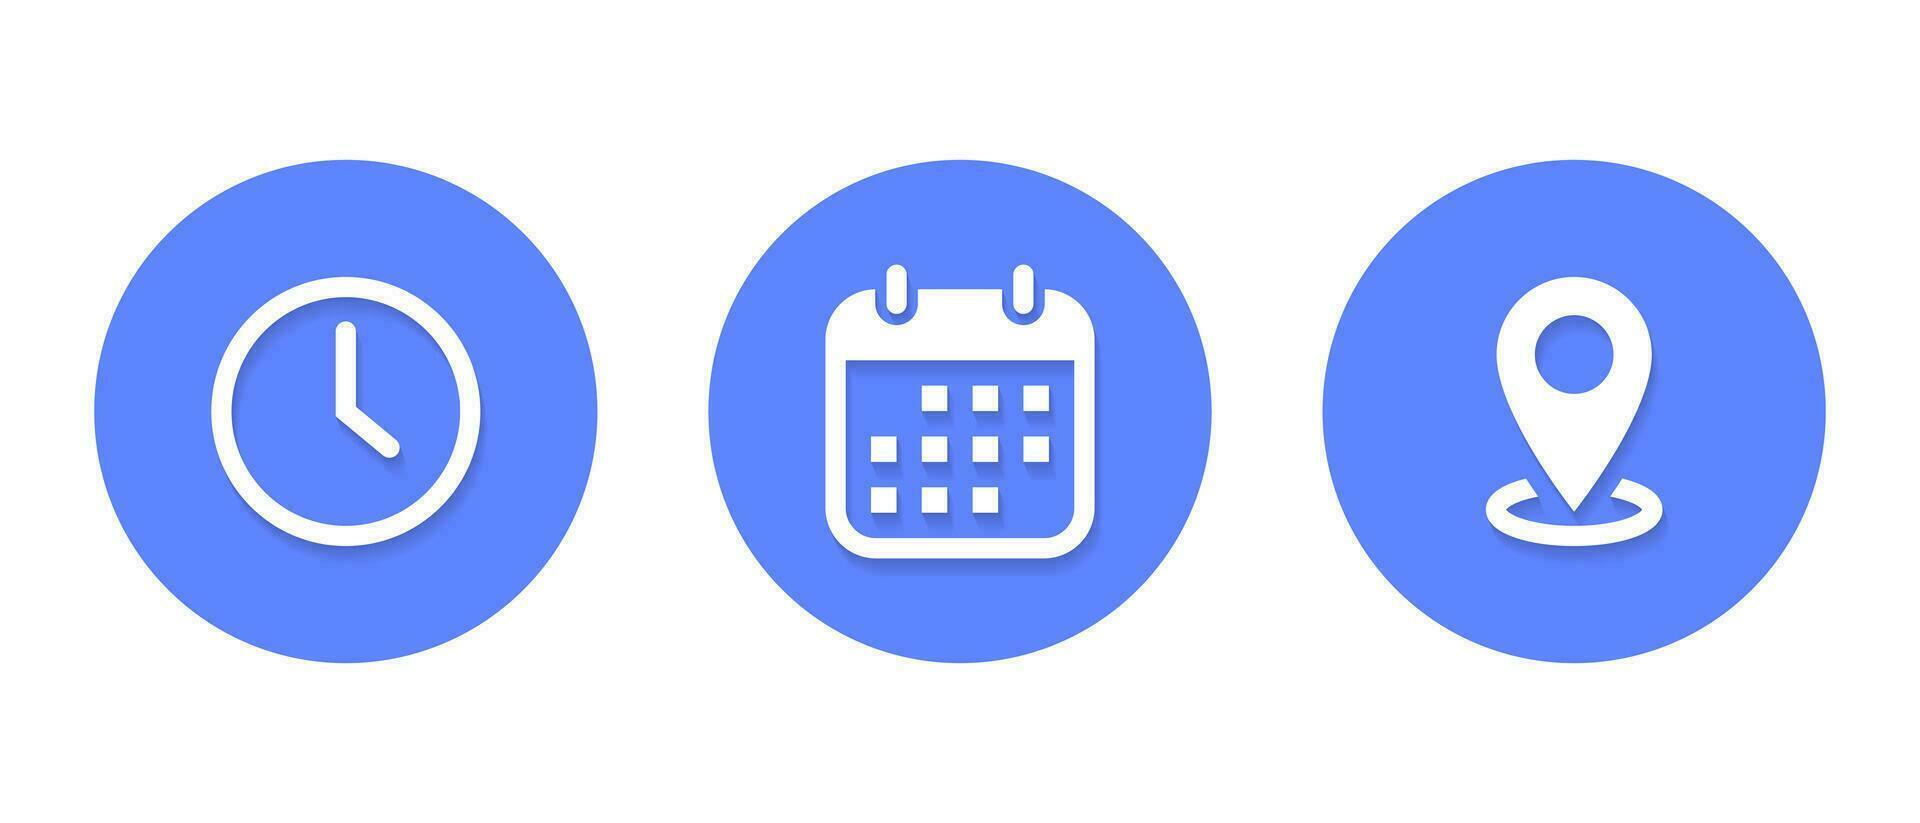 Time, date, and address icon vector in flat concept. Elements of business events